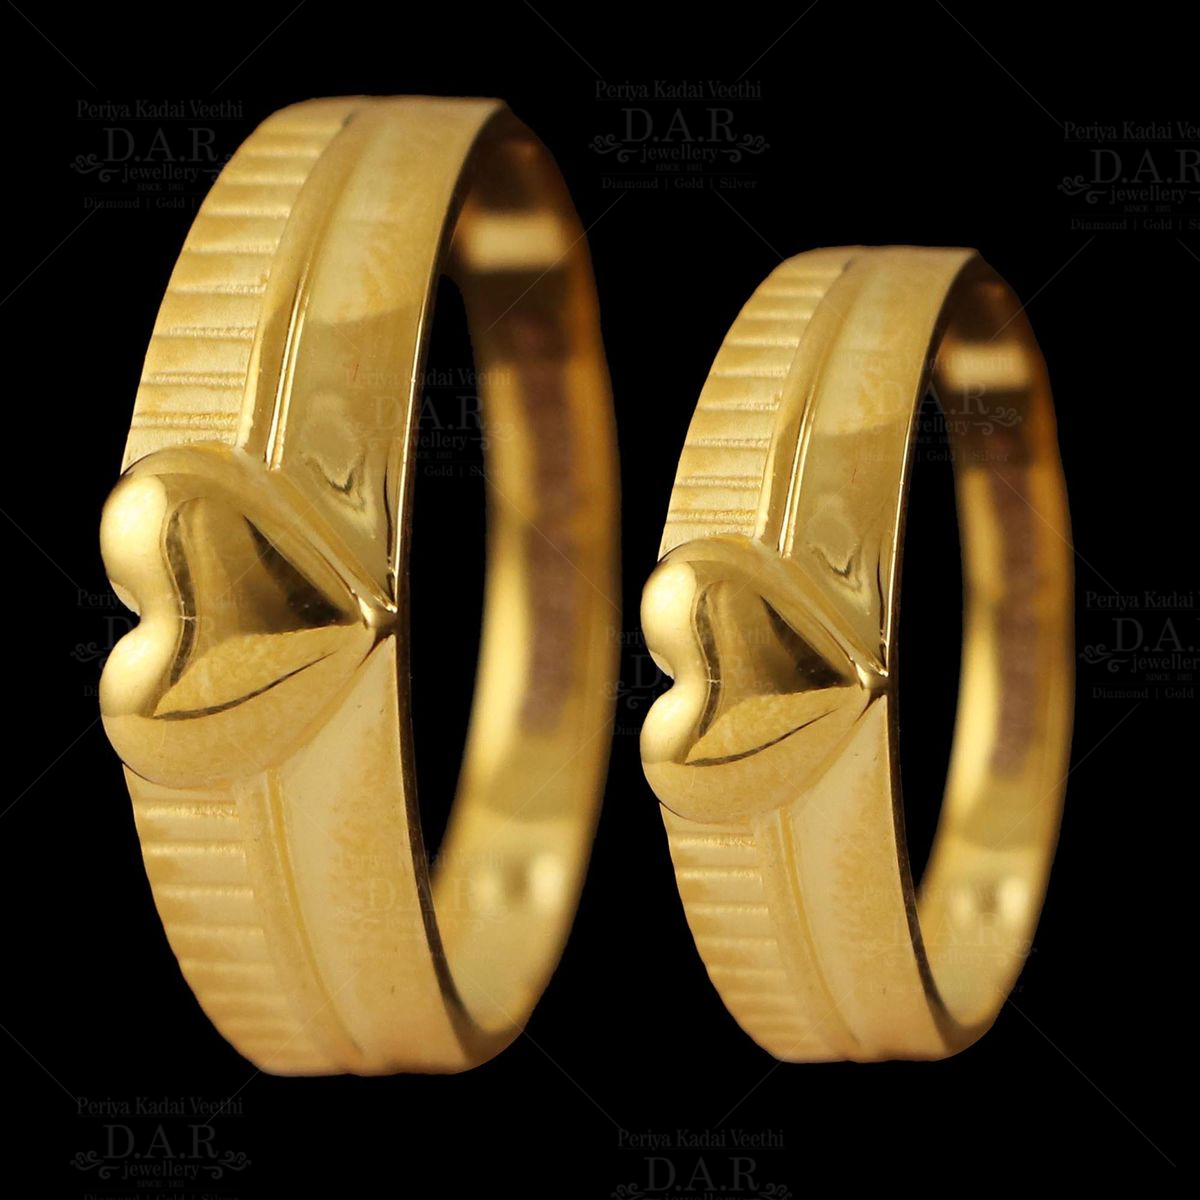 Hearts Locked Gold Couple Name Rings | Couple ring design, Gold ring  designs, Wedding rings simple